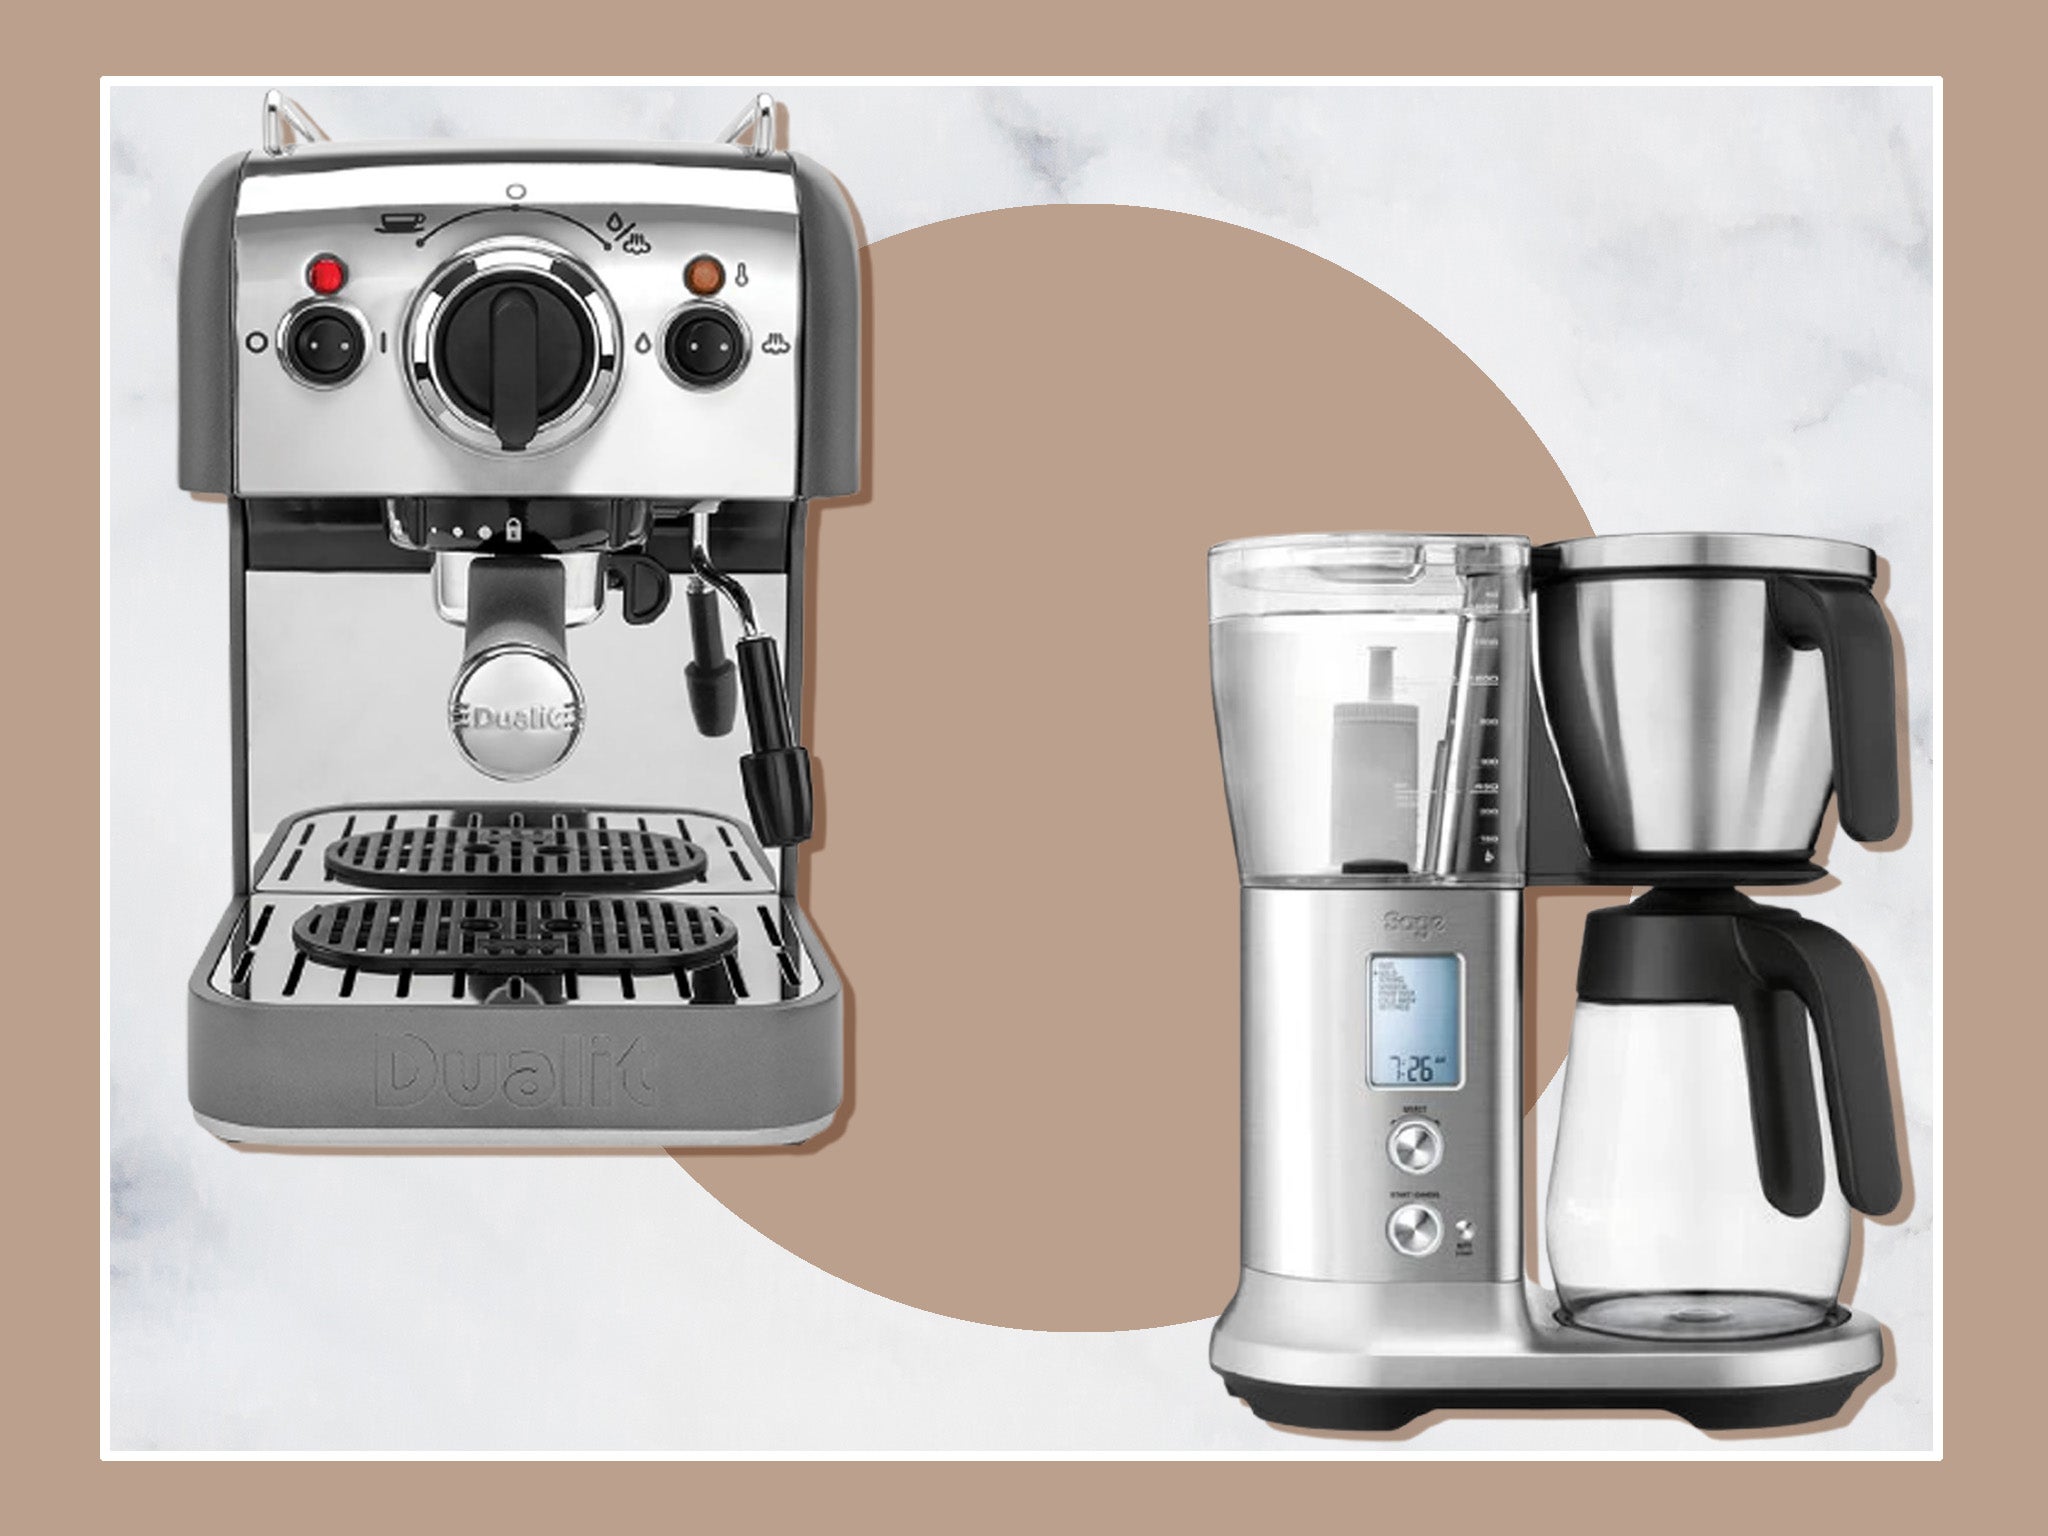 The amount of coffee your household drinks, space available, and how you plan to grind your coffee are points to consider when shopping for a machine